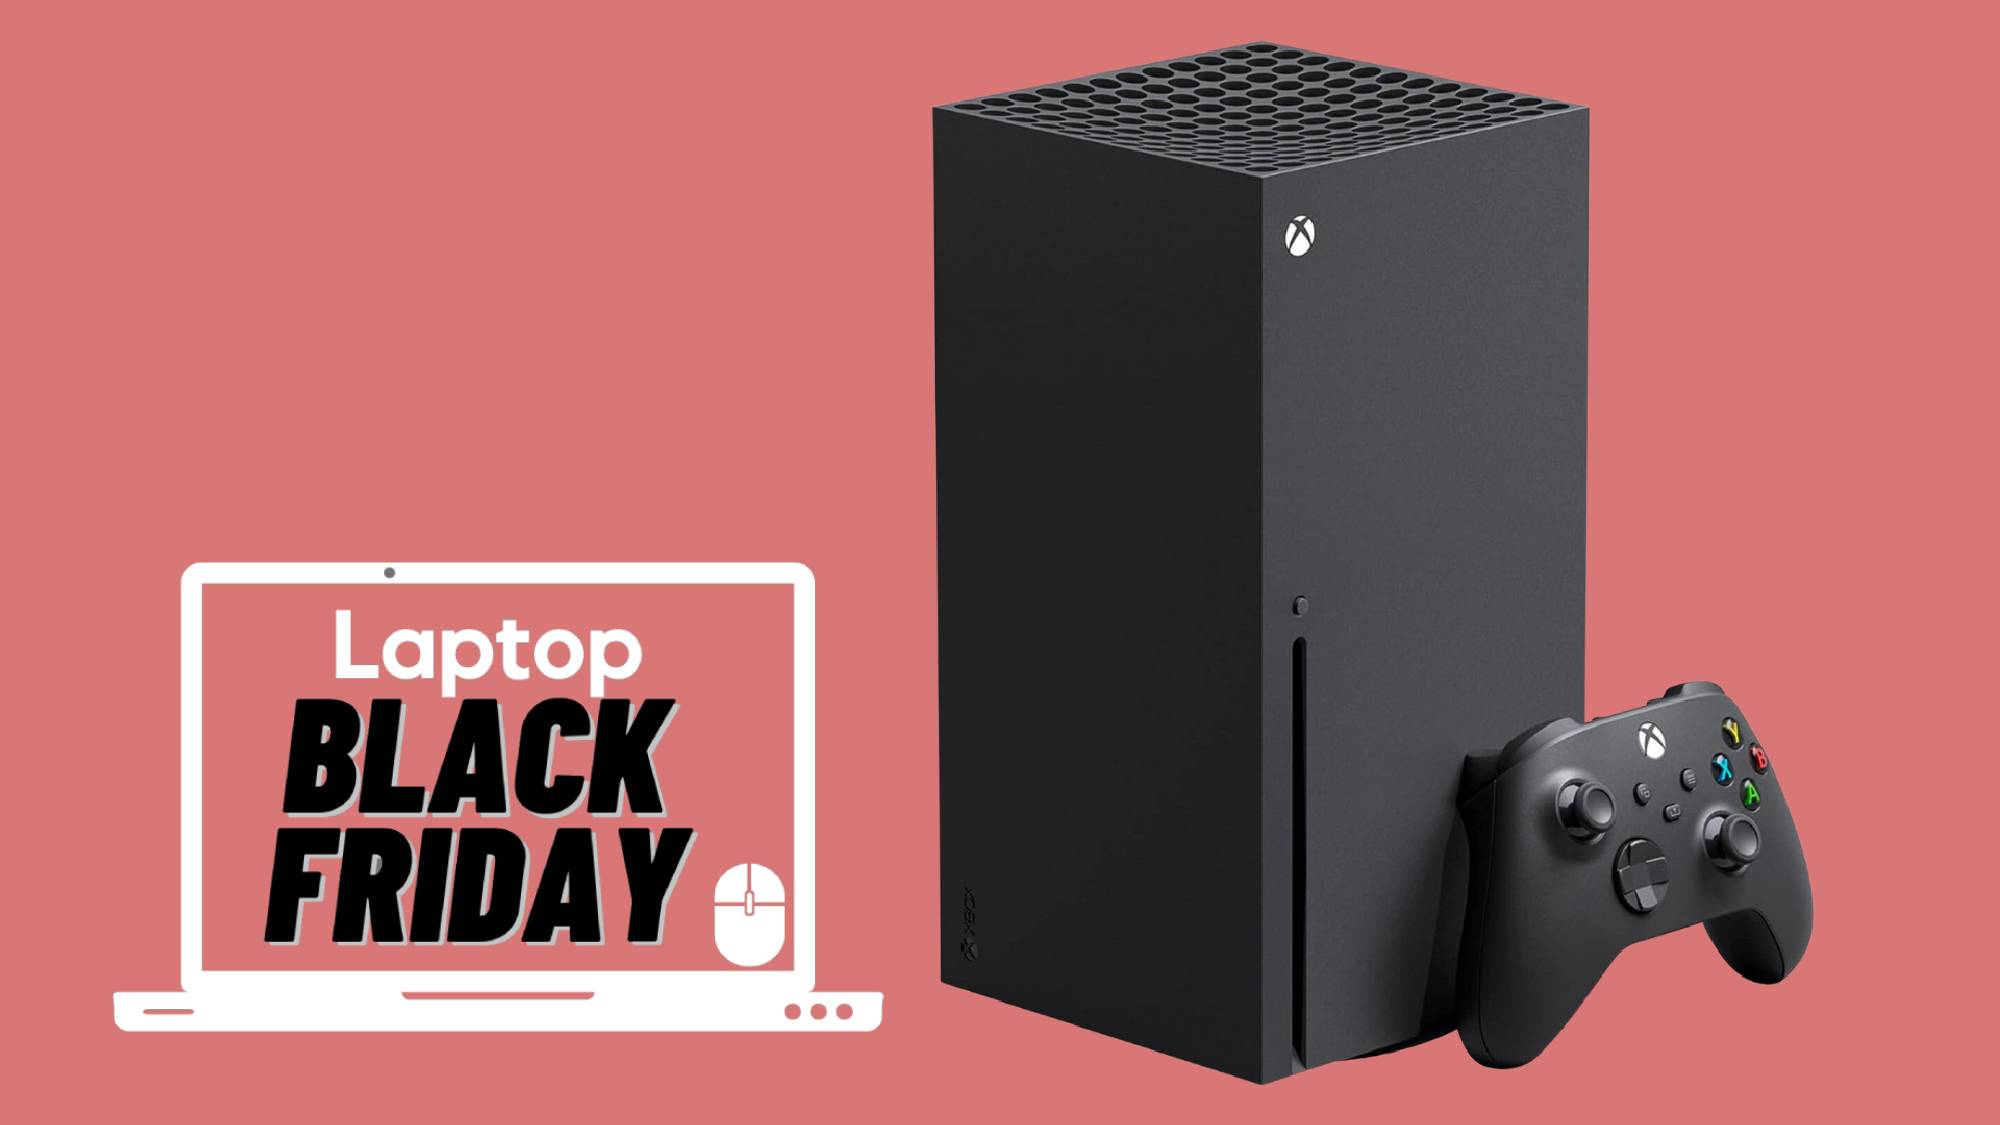 Save $150 On The Xbox Series X With This Amazing Black Friday Deal